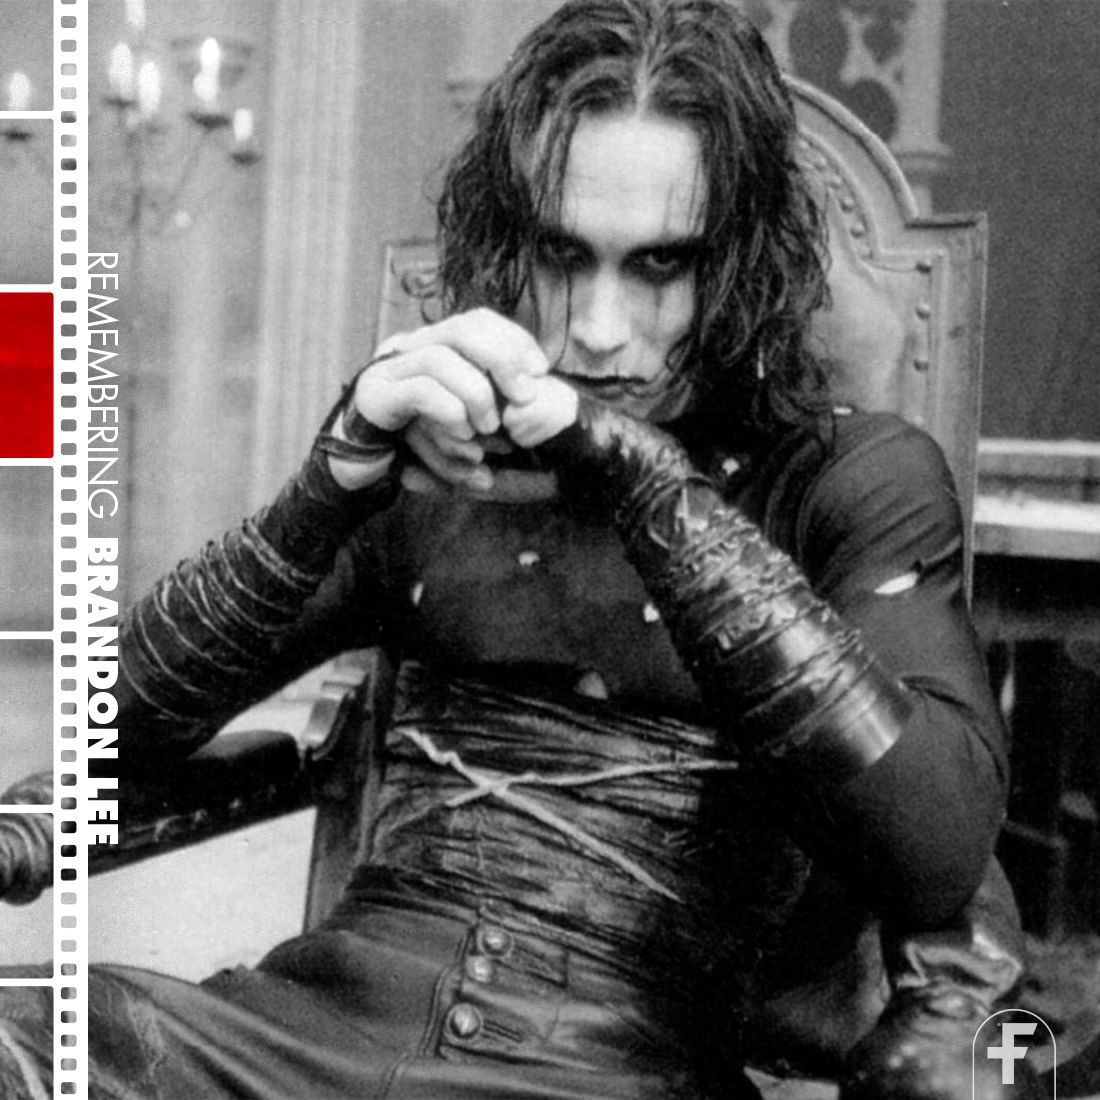 On his birthday, we'd like to remember Brandon Lee.